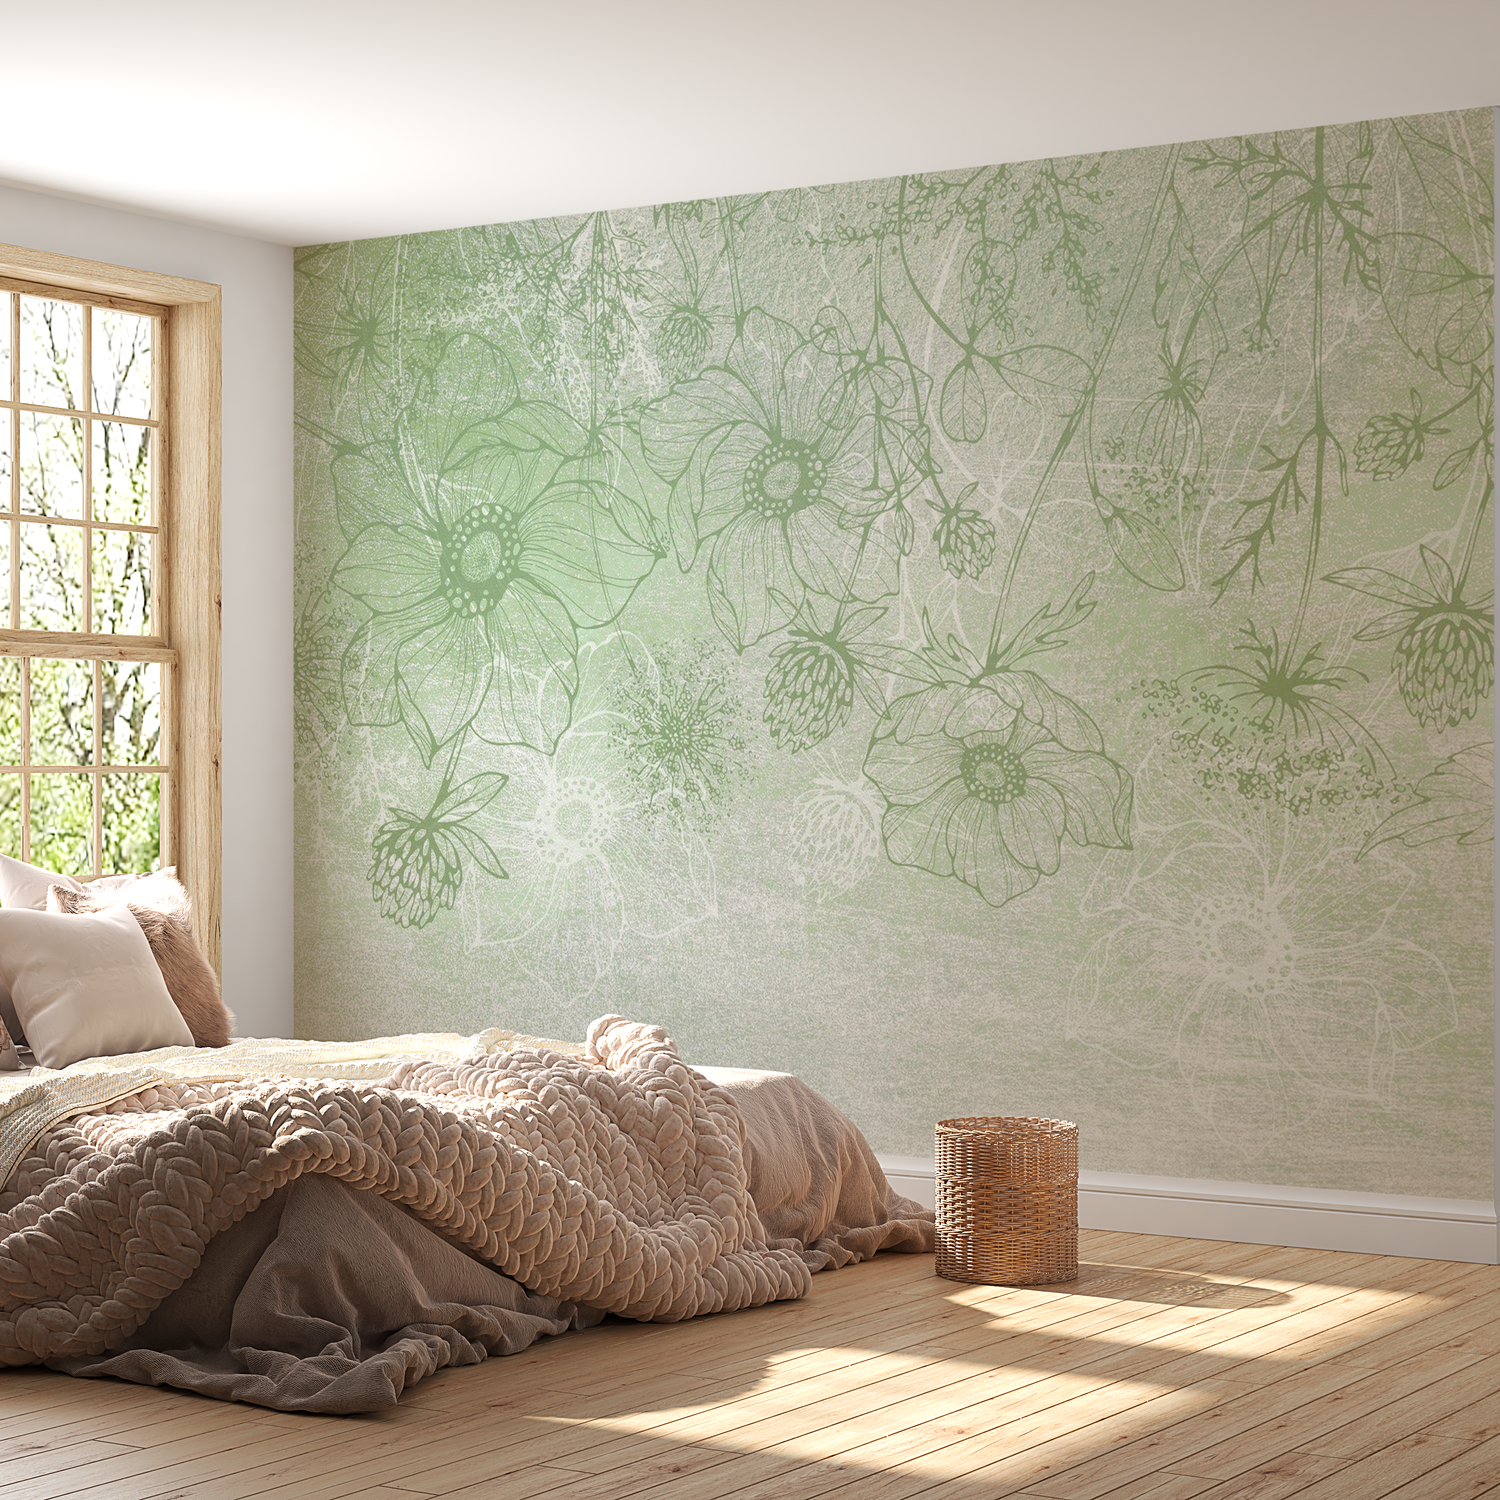 Peel & Stick Botanical Wall Mural - Floral Green Lineart - Removable Wallpaper 38"Wx27"H